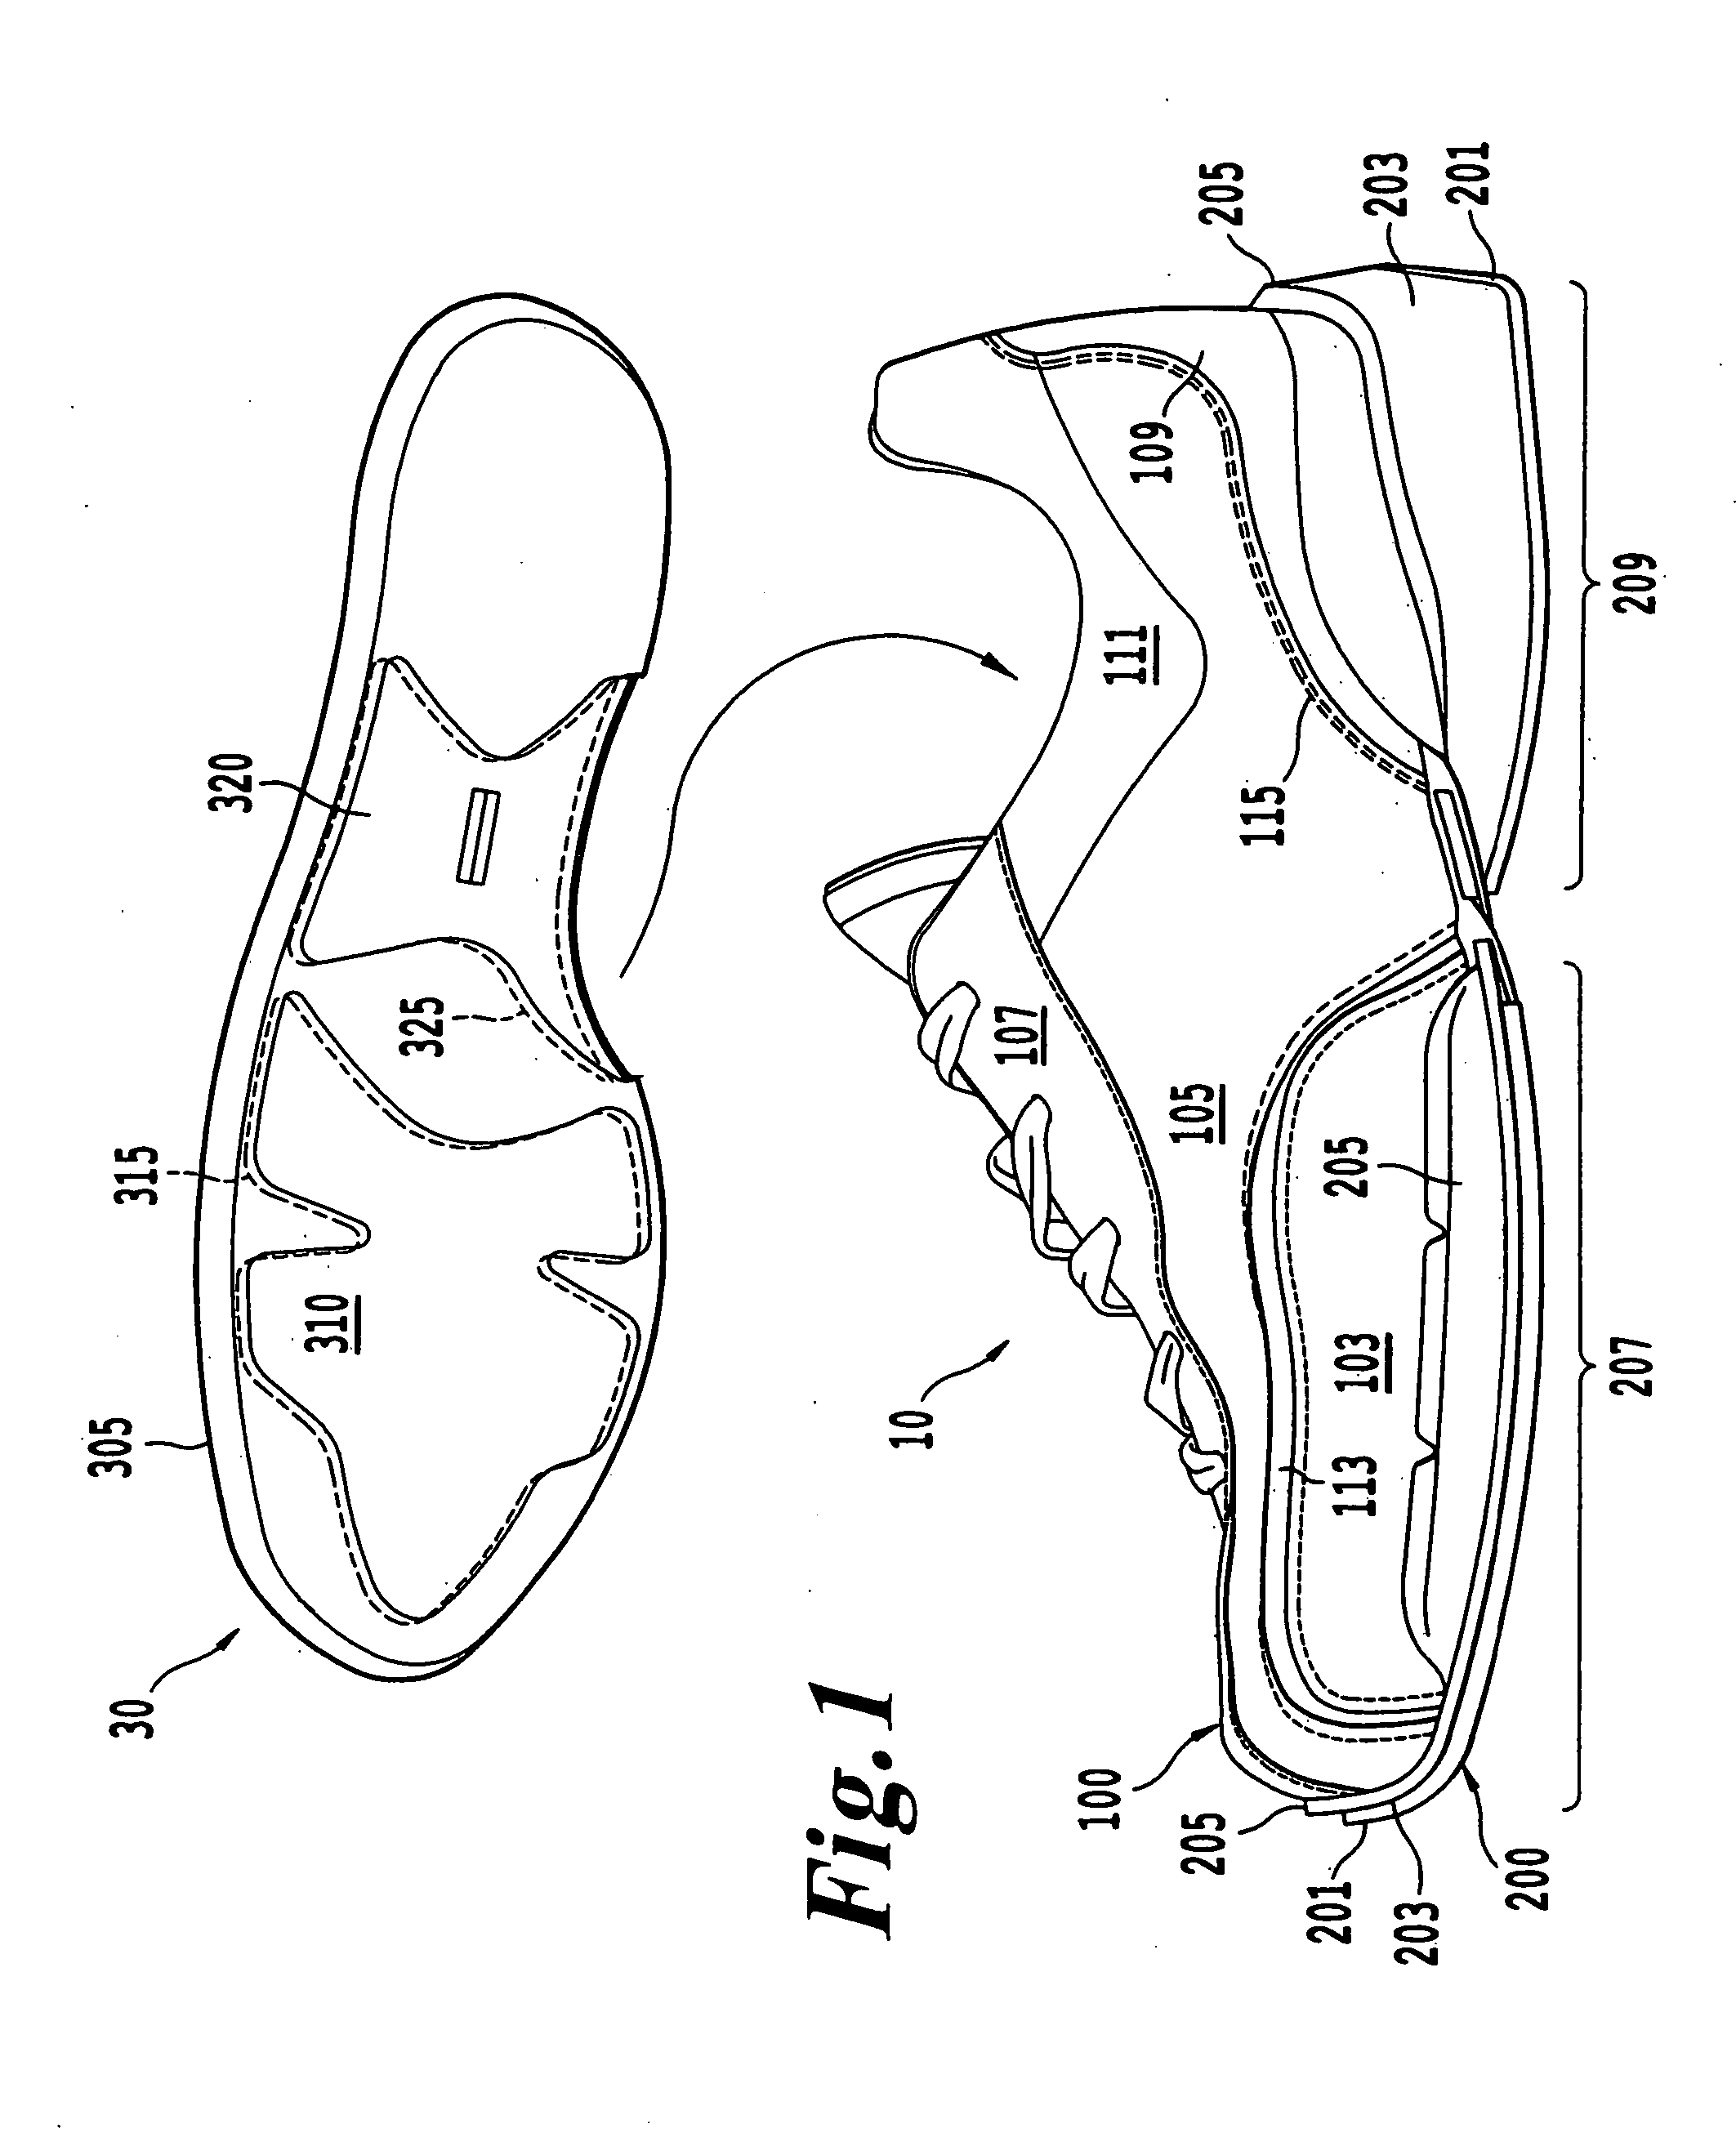 Method and system for providing customized footwear to a retail consumer